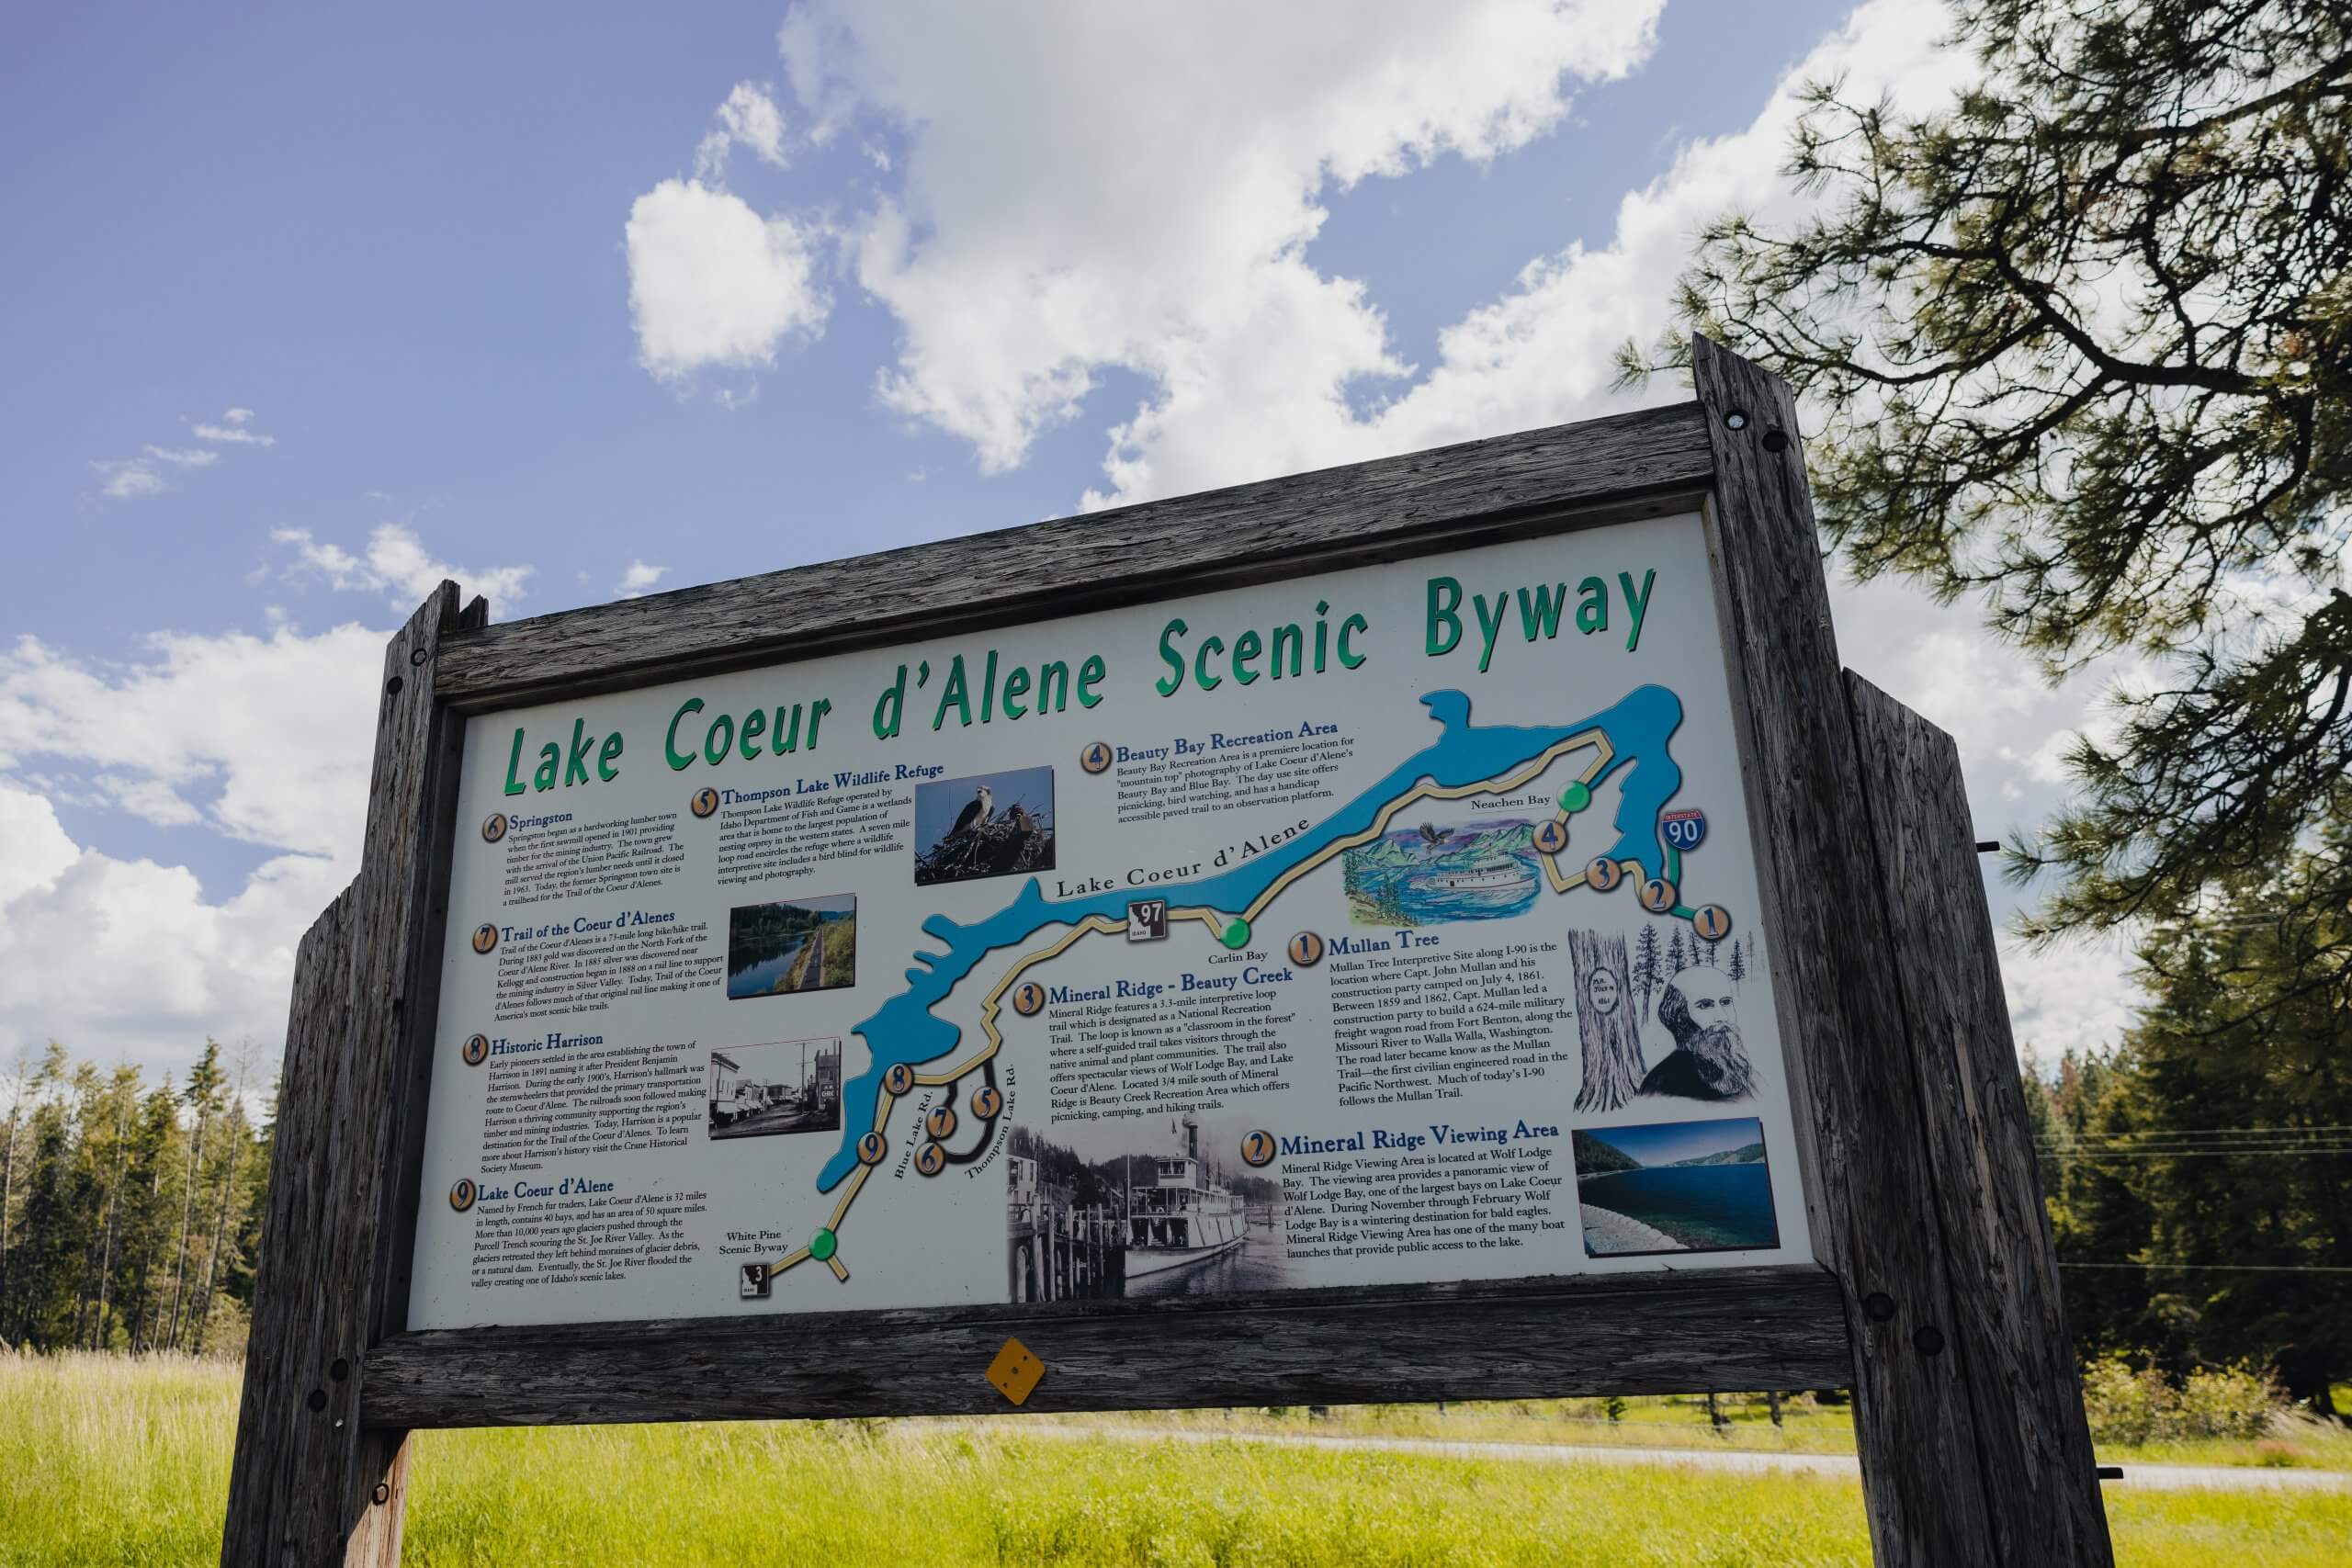 Lake Coeur d'Alene Scenic Byway signage.